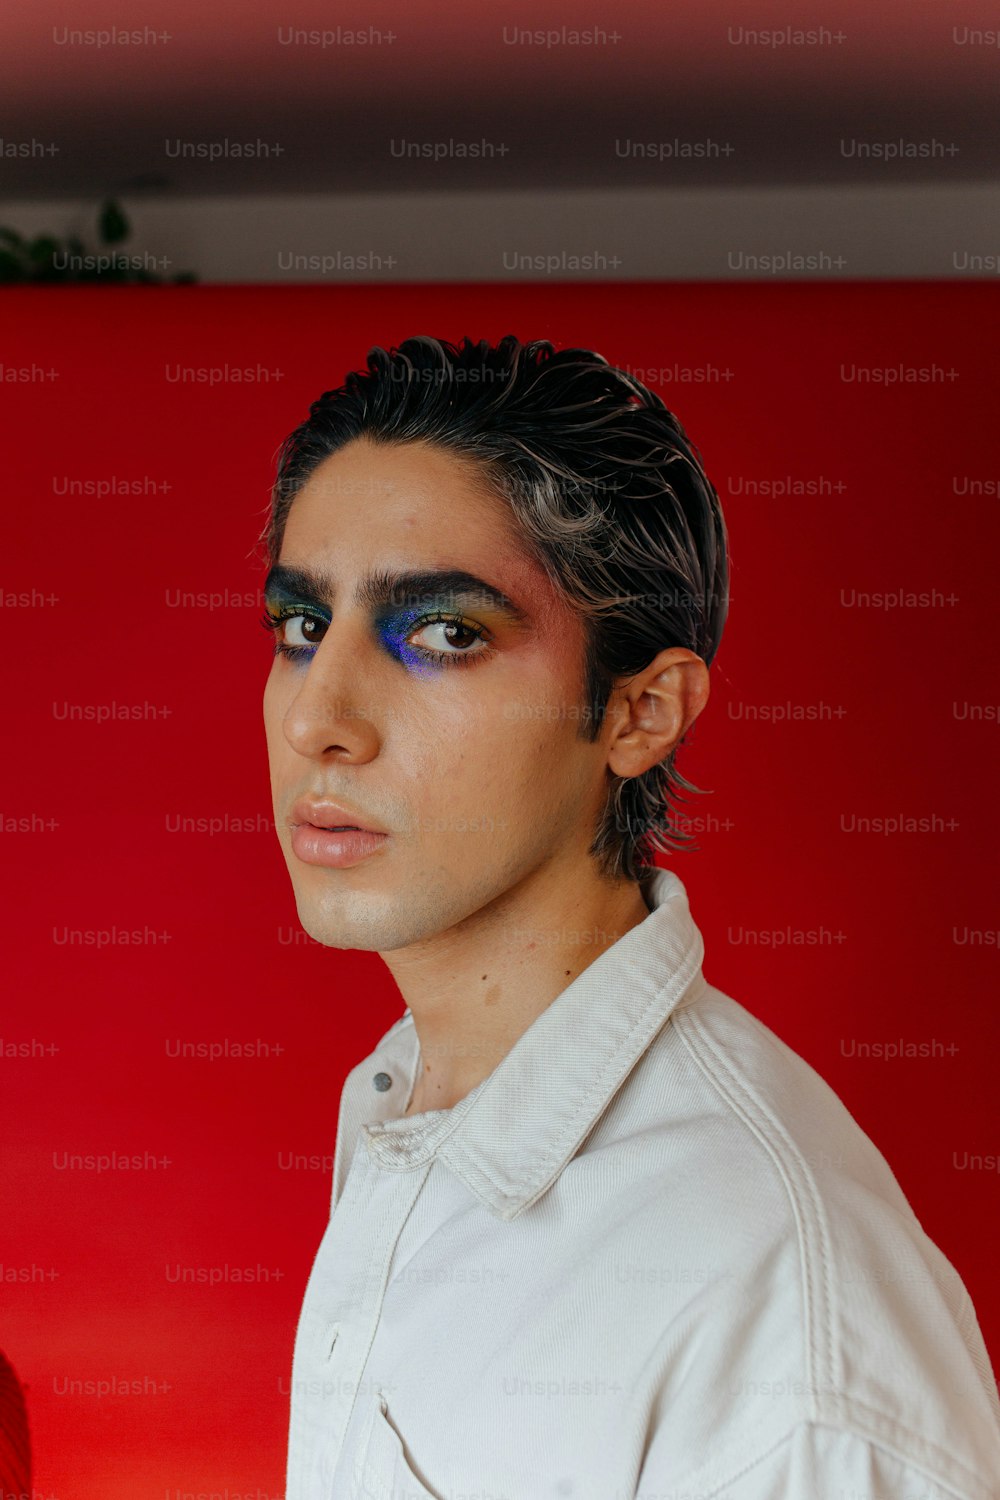 a man with black and blue makeup on his face